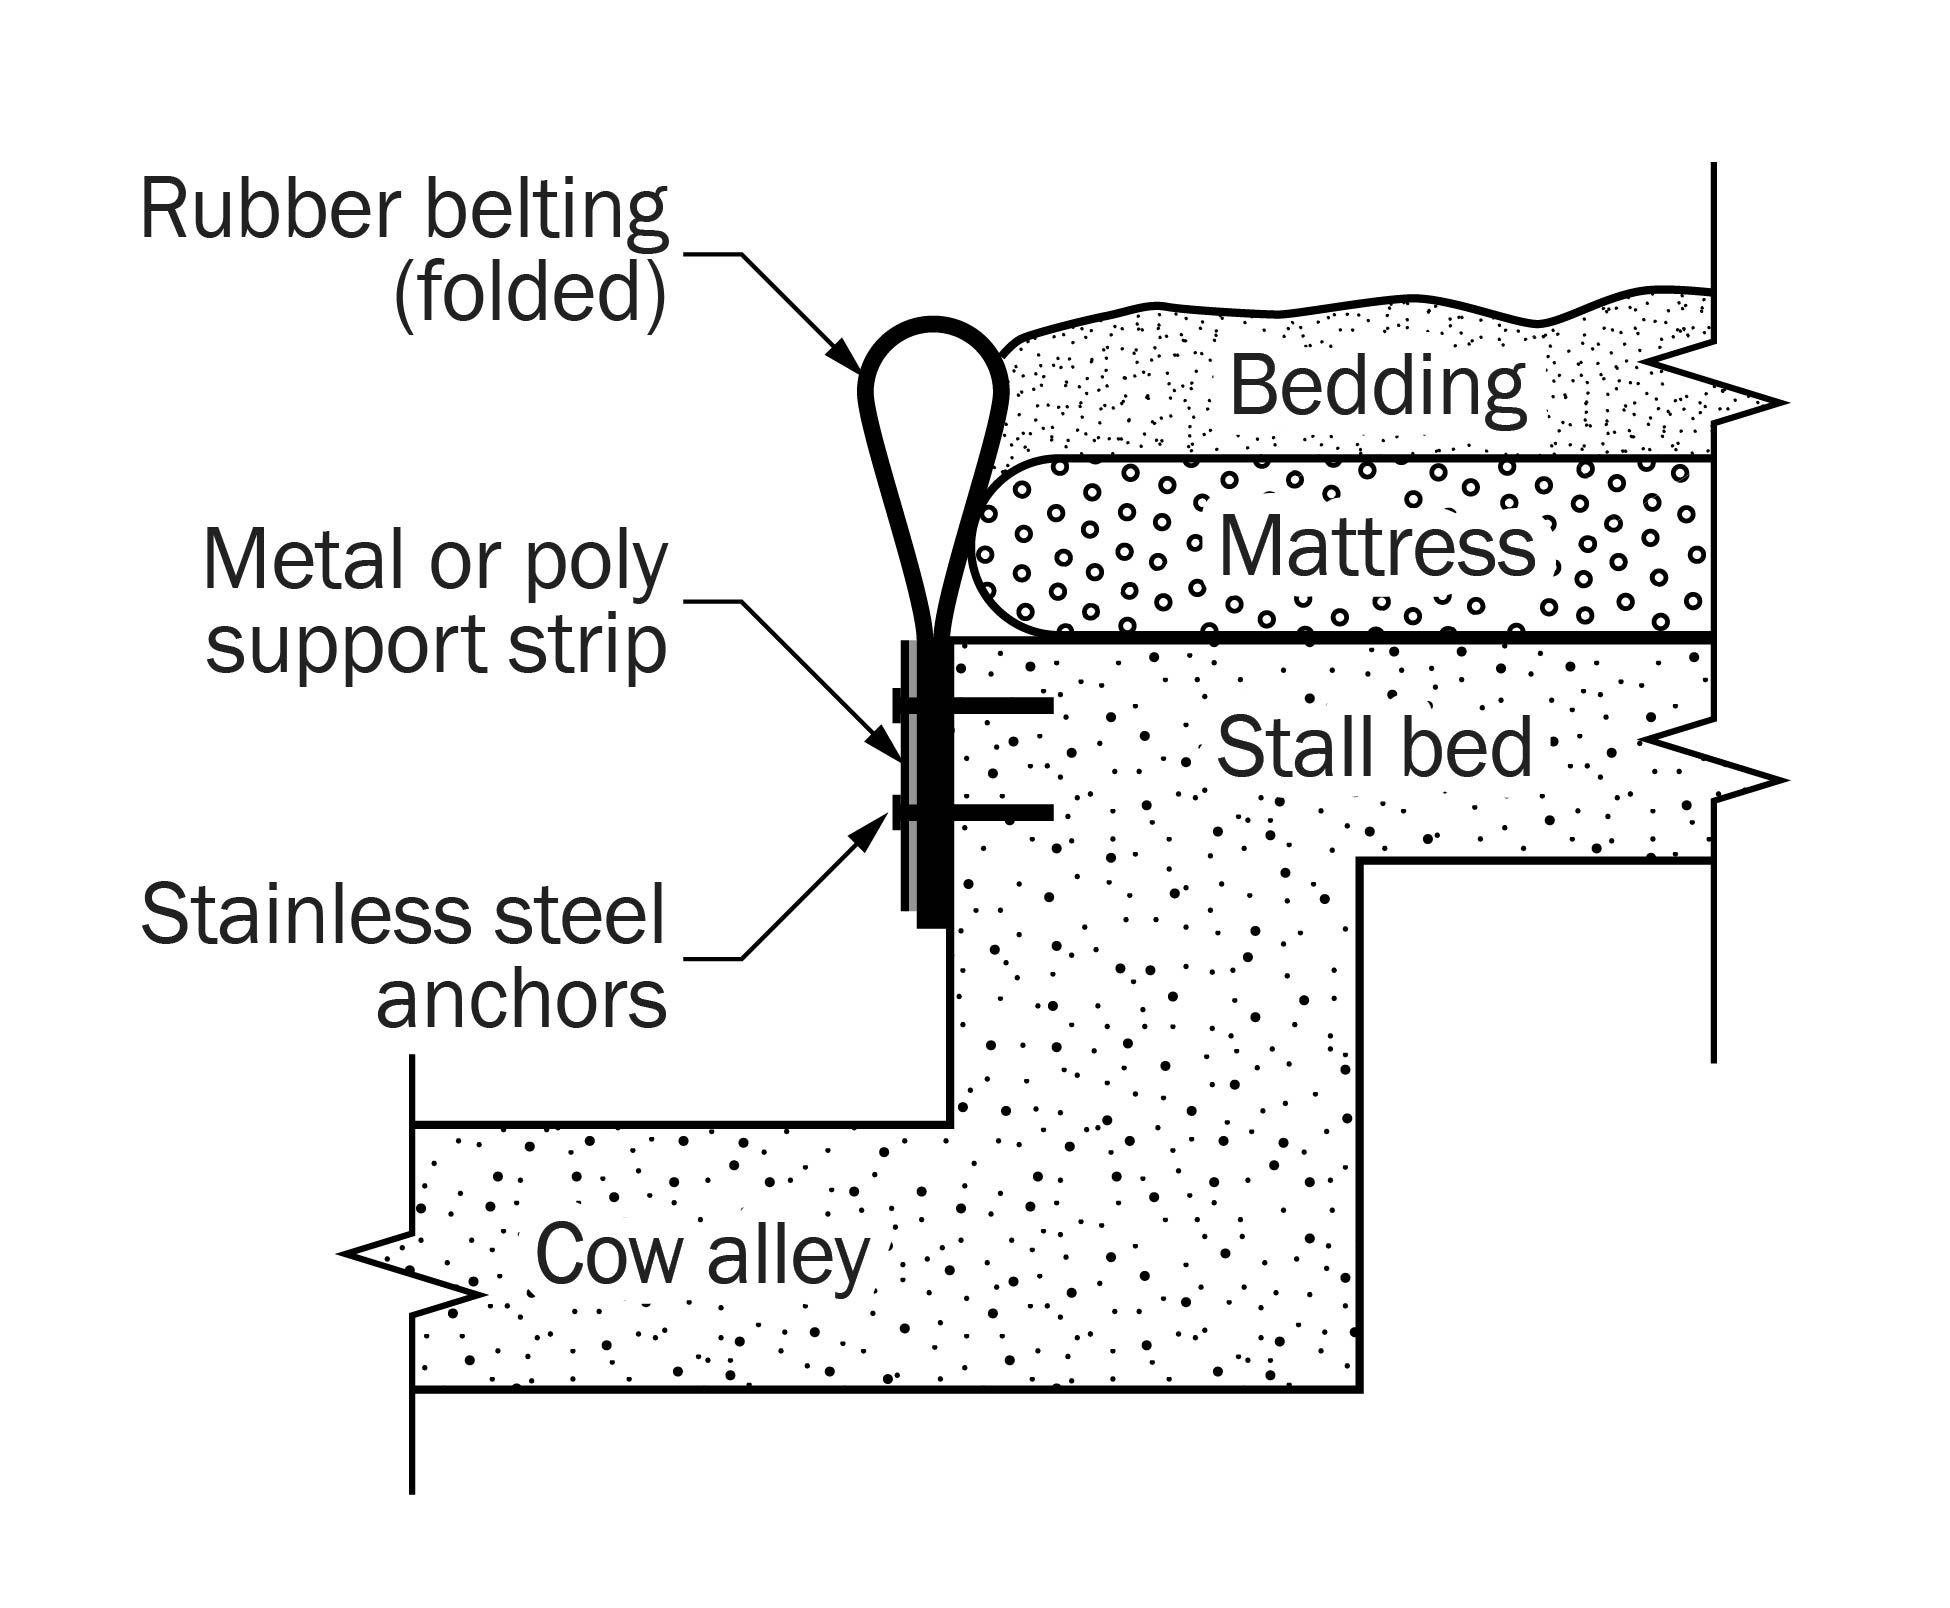 Graphic showing cross-section of bedding retainer. Bedding is at the top right, with the mattress below it above the stall bed. The cow alley is at the bottom left. On the left side of the bedding, mattress and stall bed is the folded rubber belting attached by a metal poly support strip with stainless steel anchors.